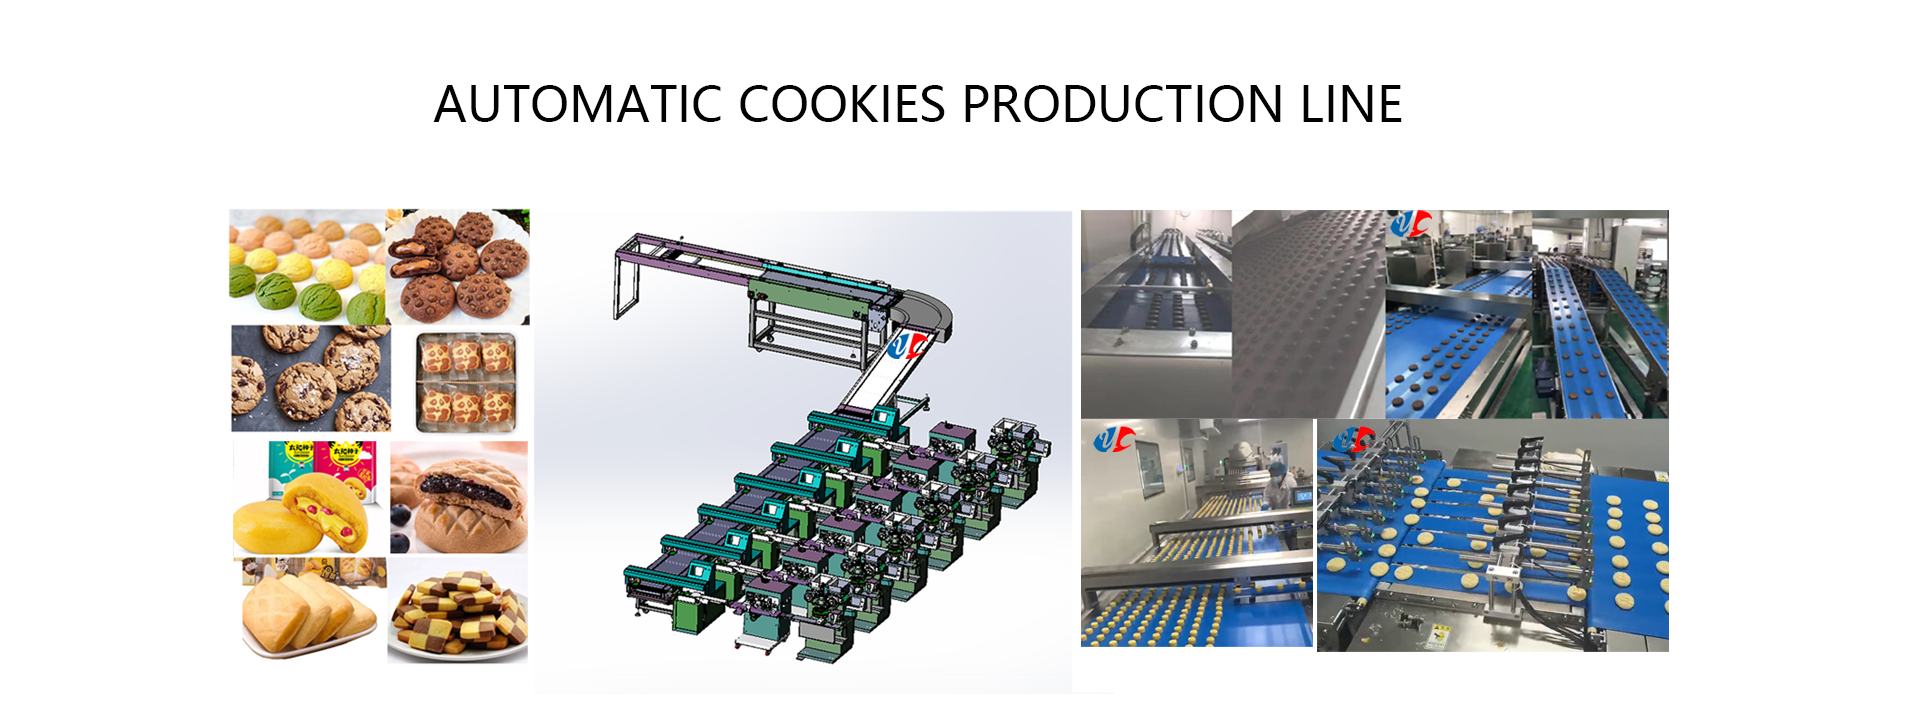 Full Automatic Cookie Line